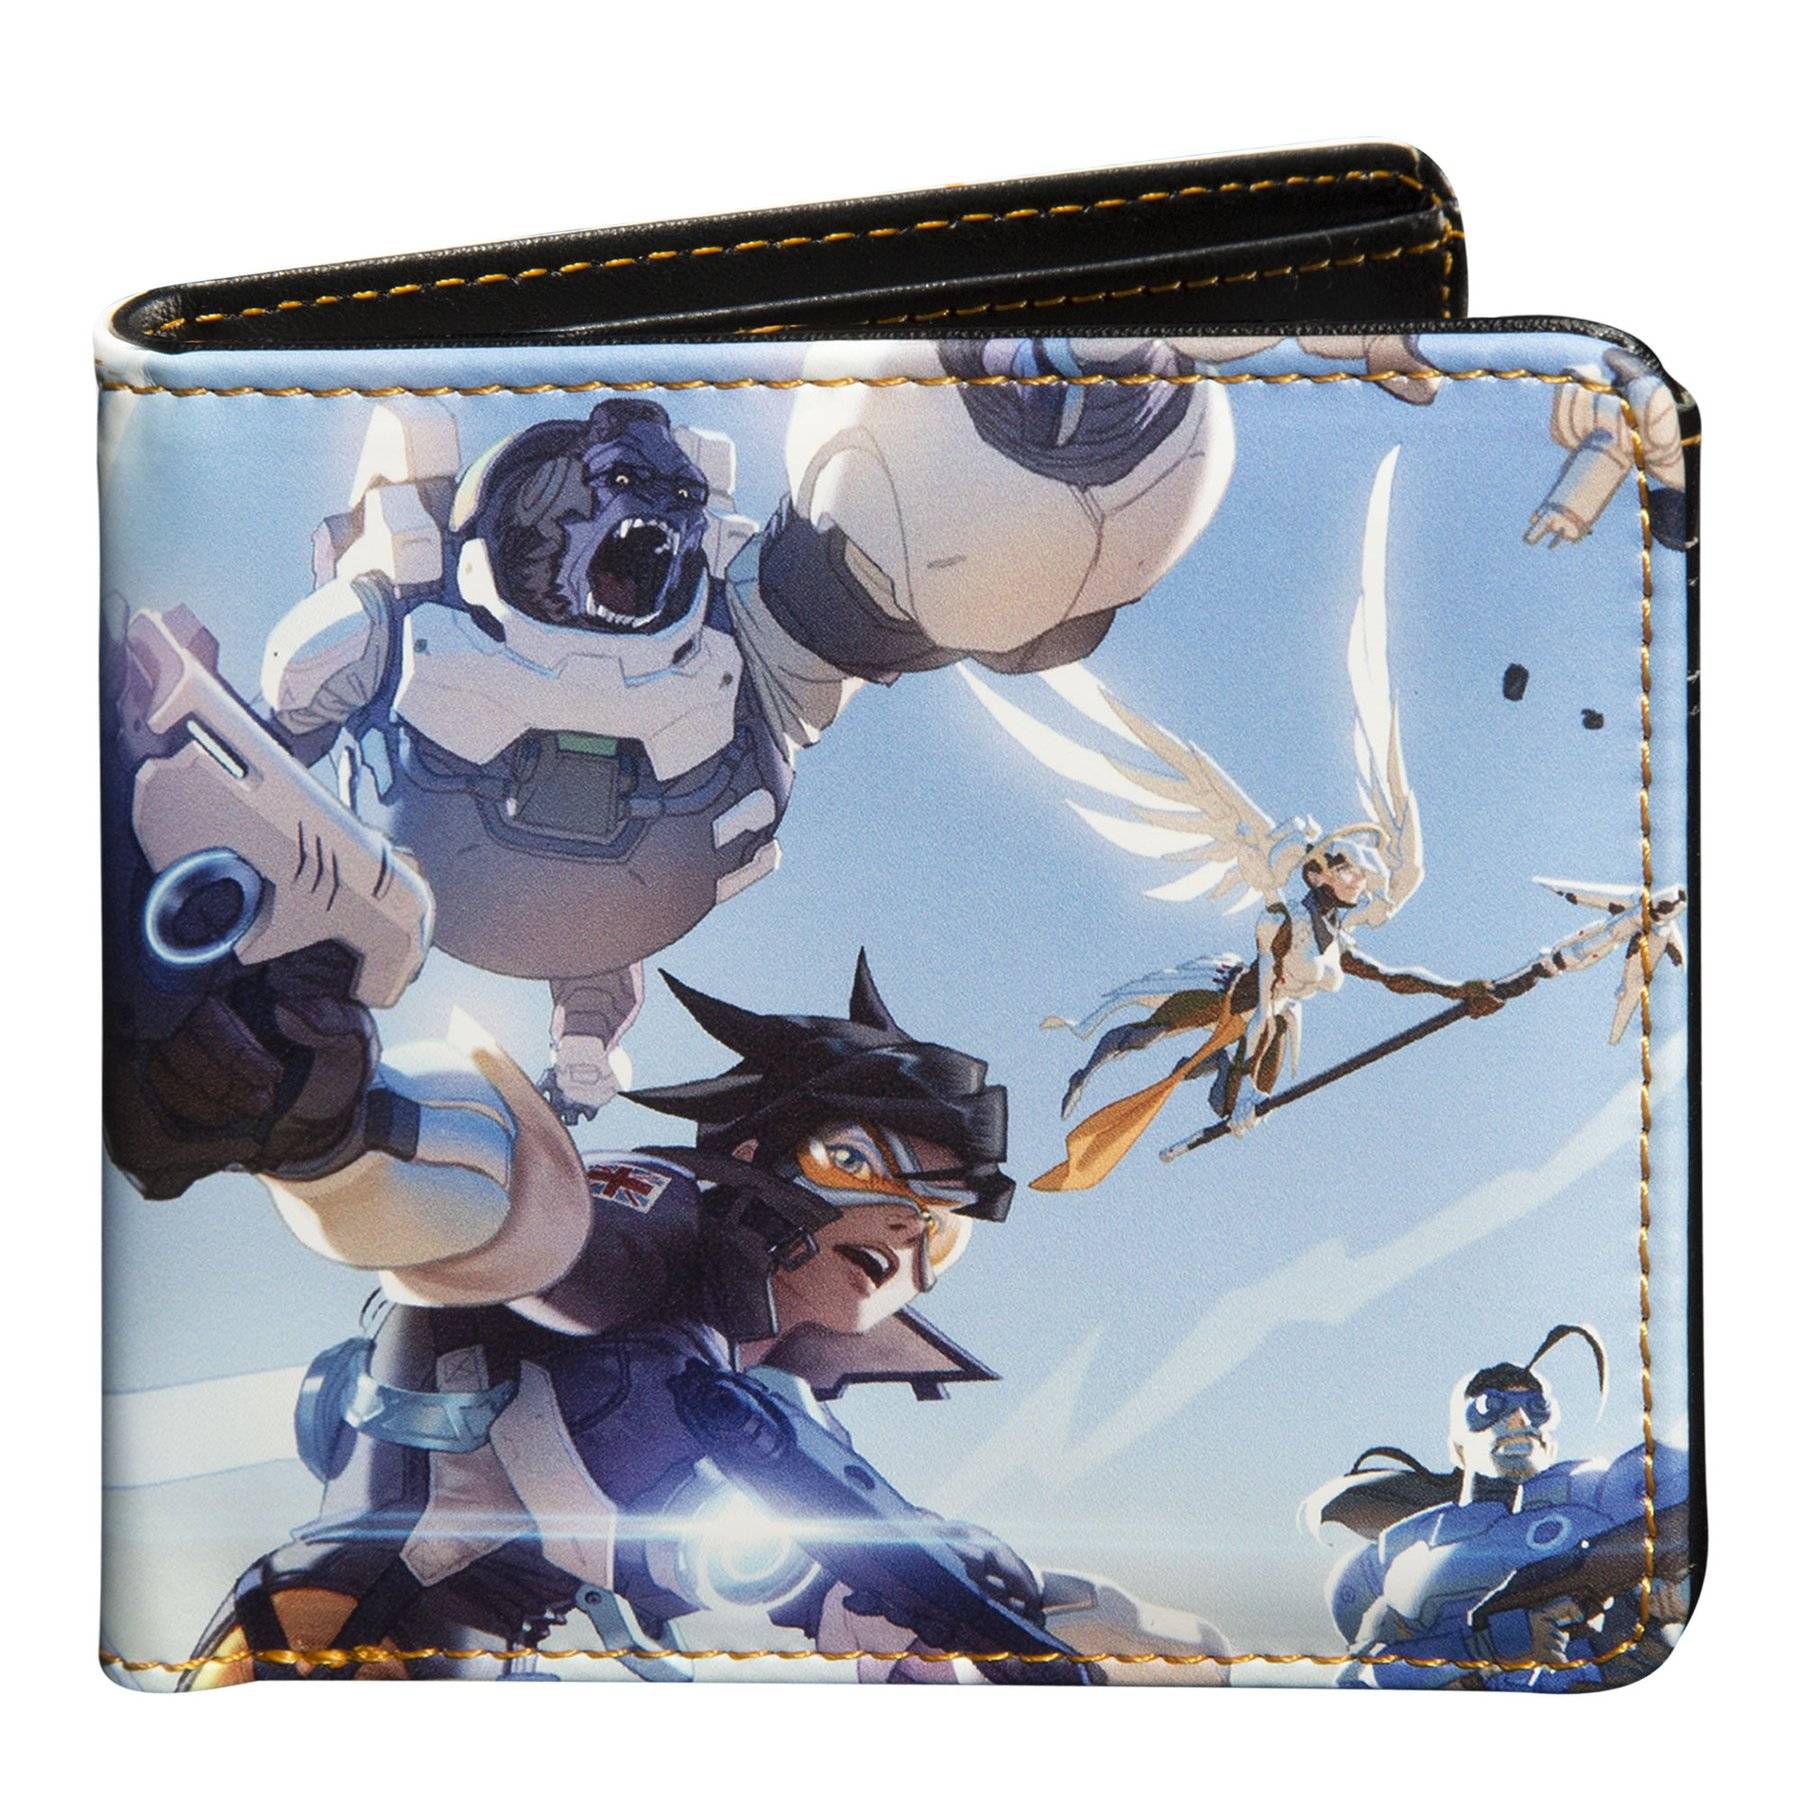 Product image for the OVERWATCH SKY BATTLE WALLET